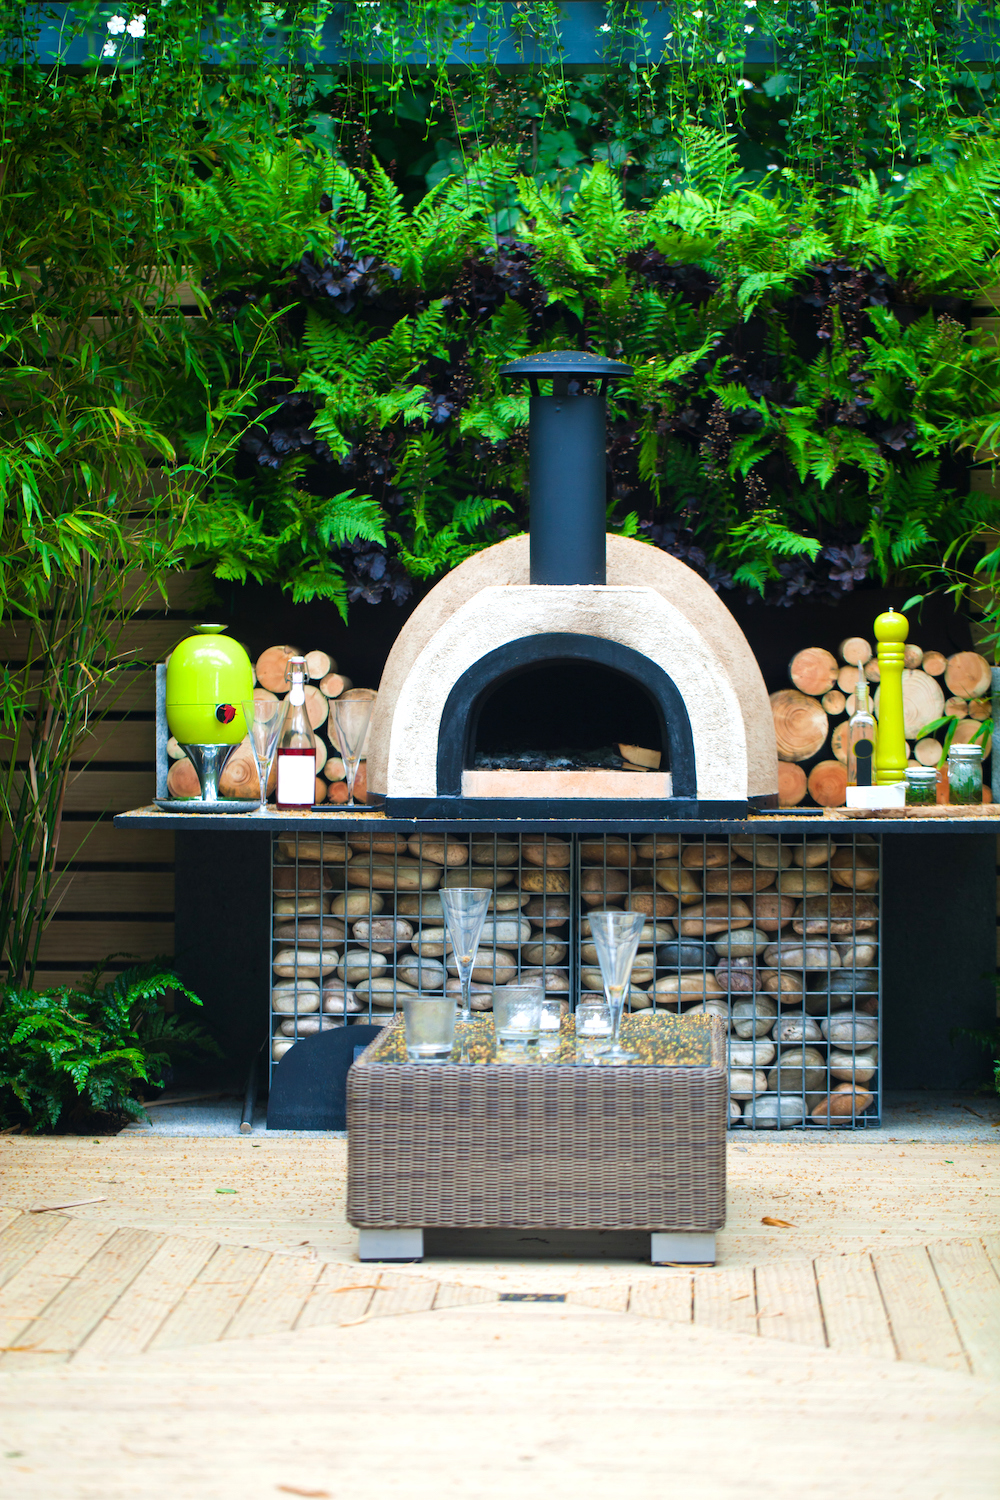 A pizza oven in a garden setting